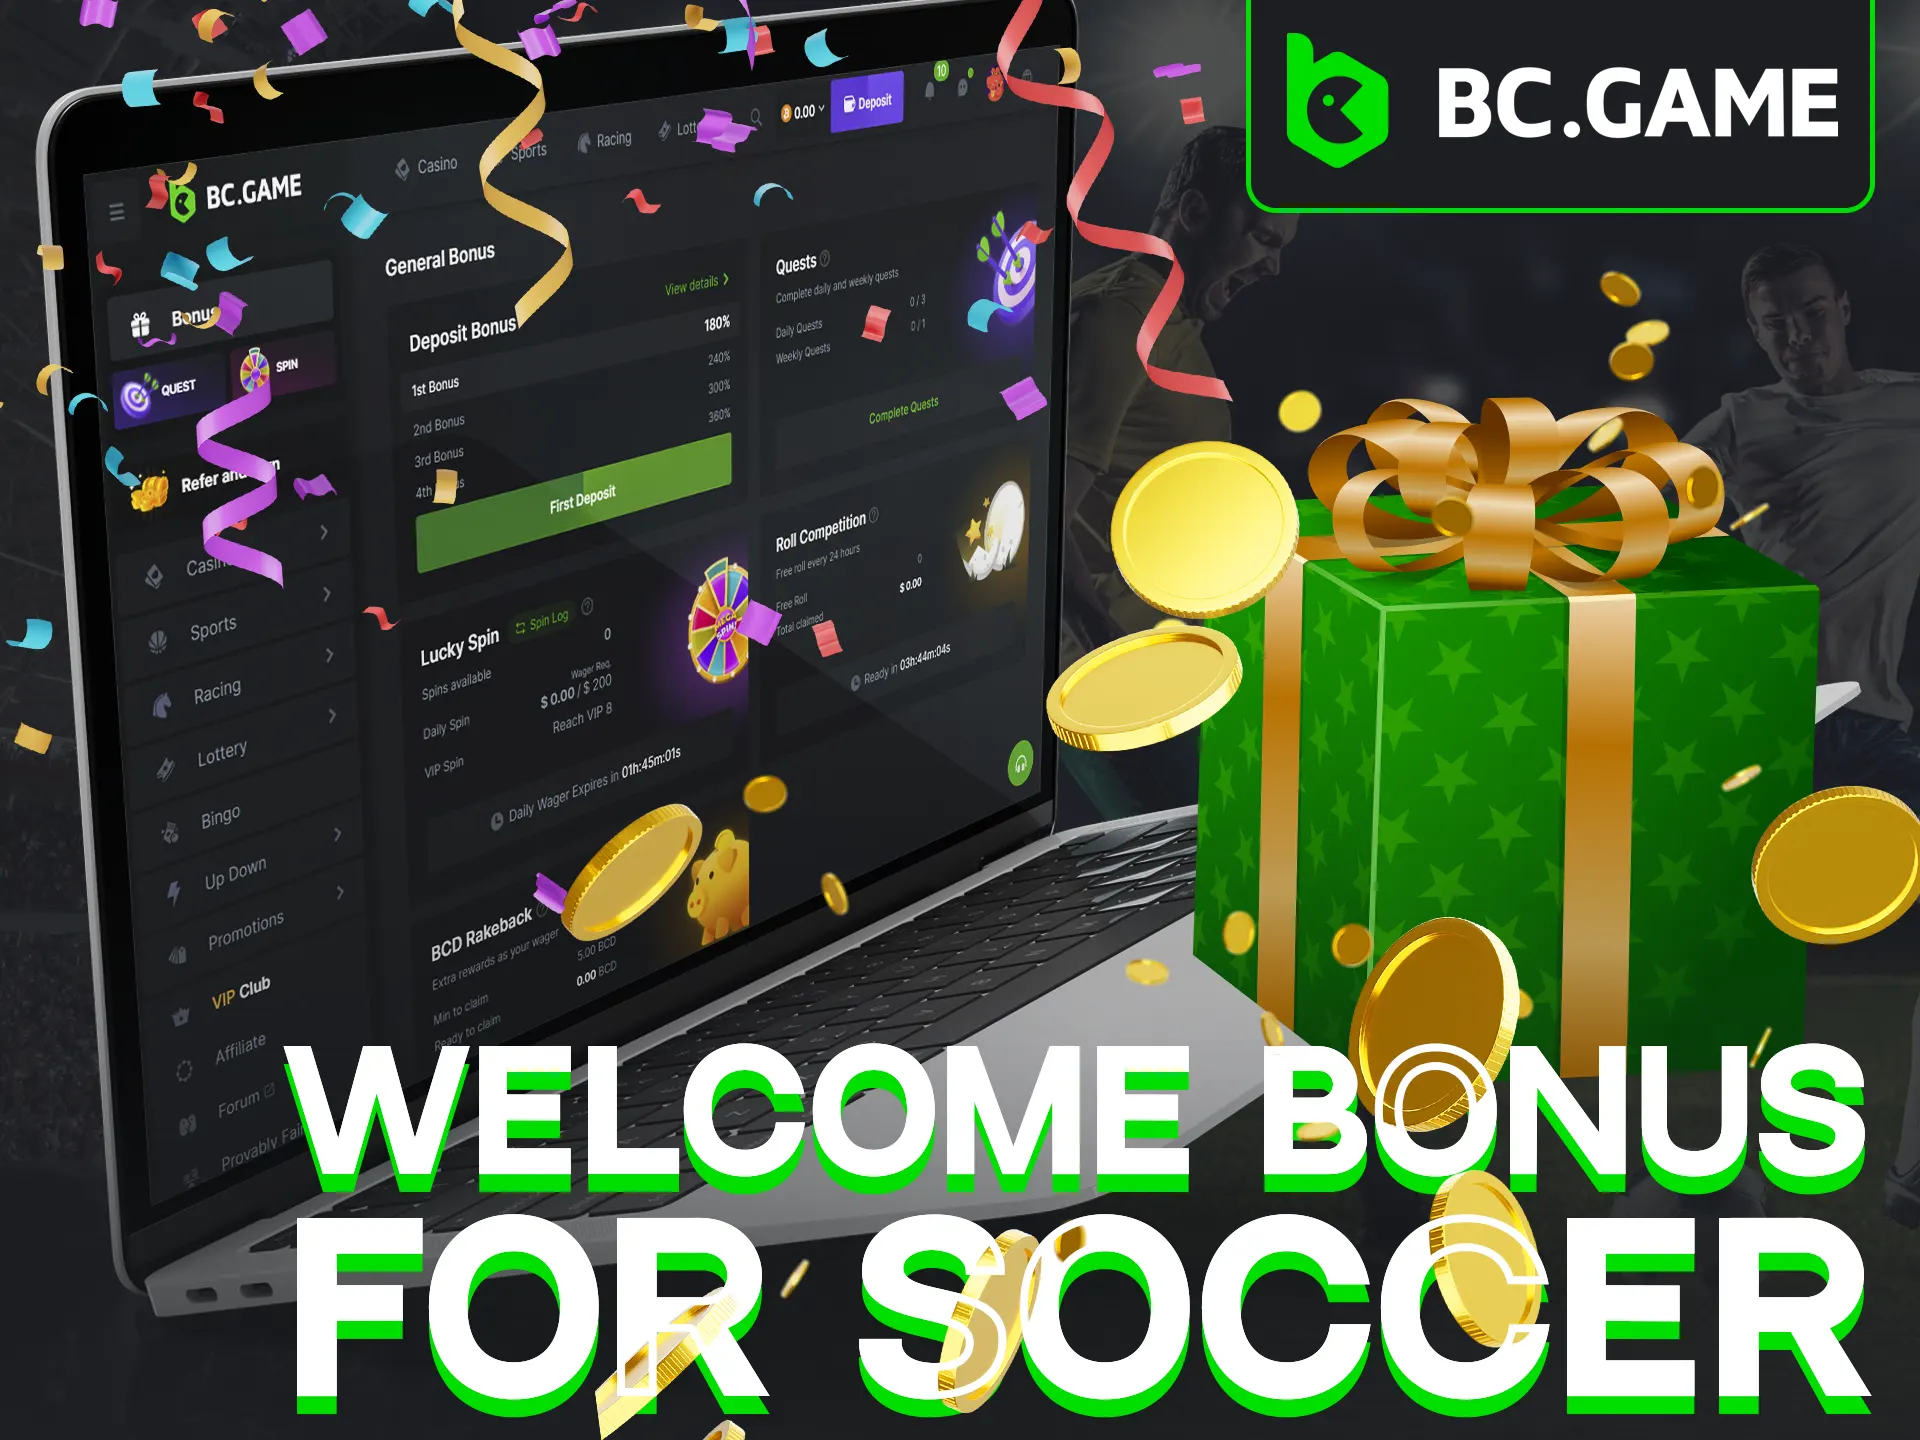 Get BC Game's welcome bonus for soccer betting on deposits.